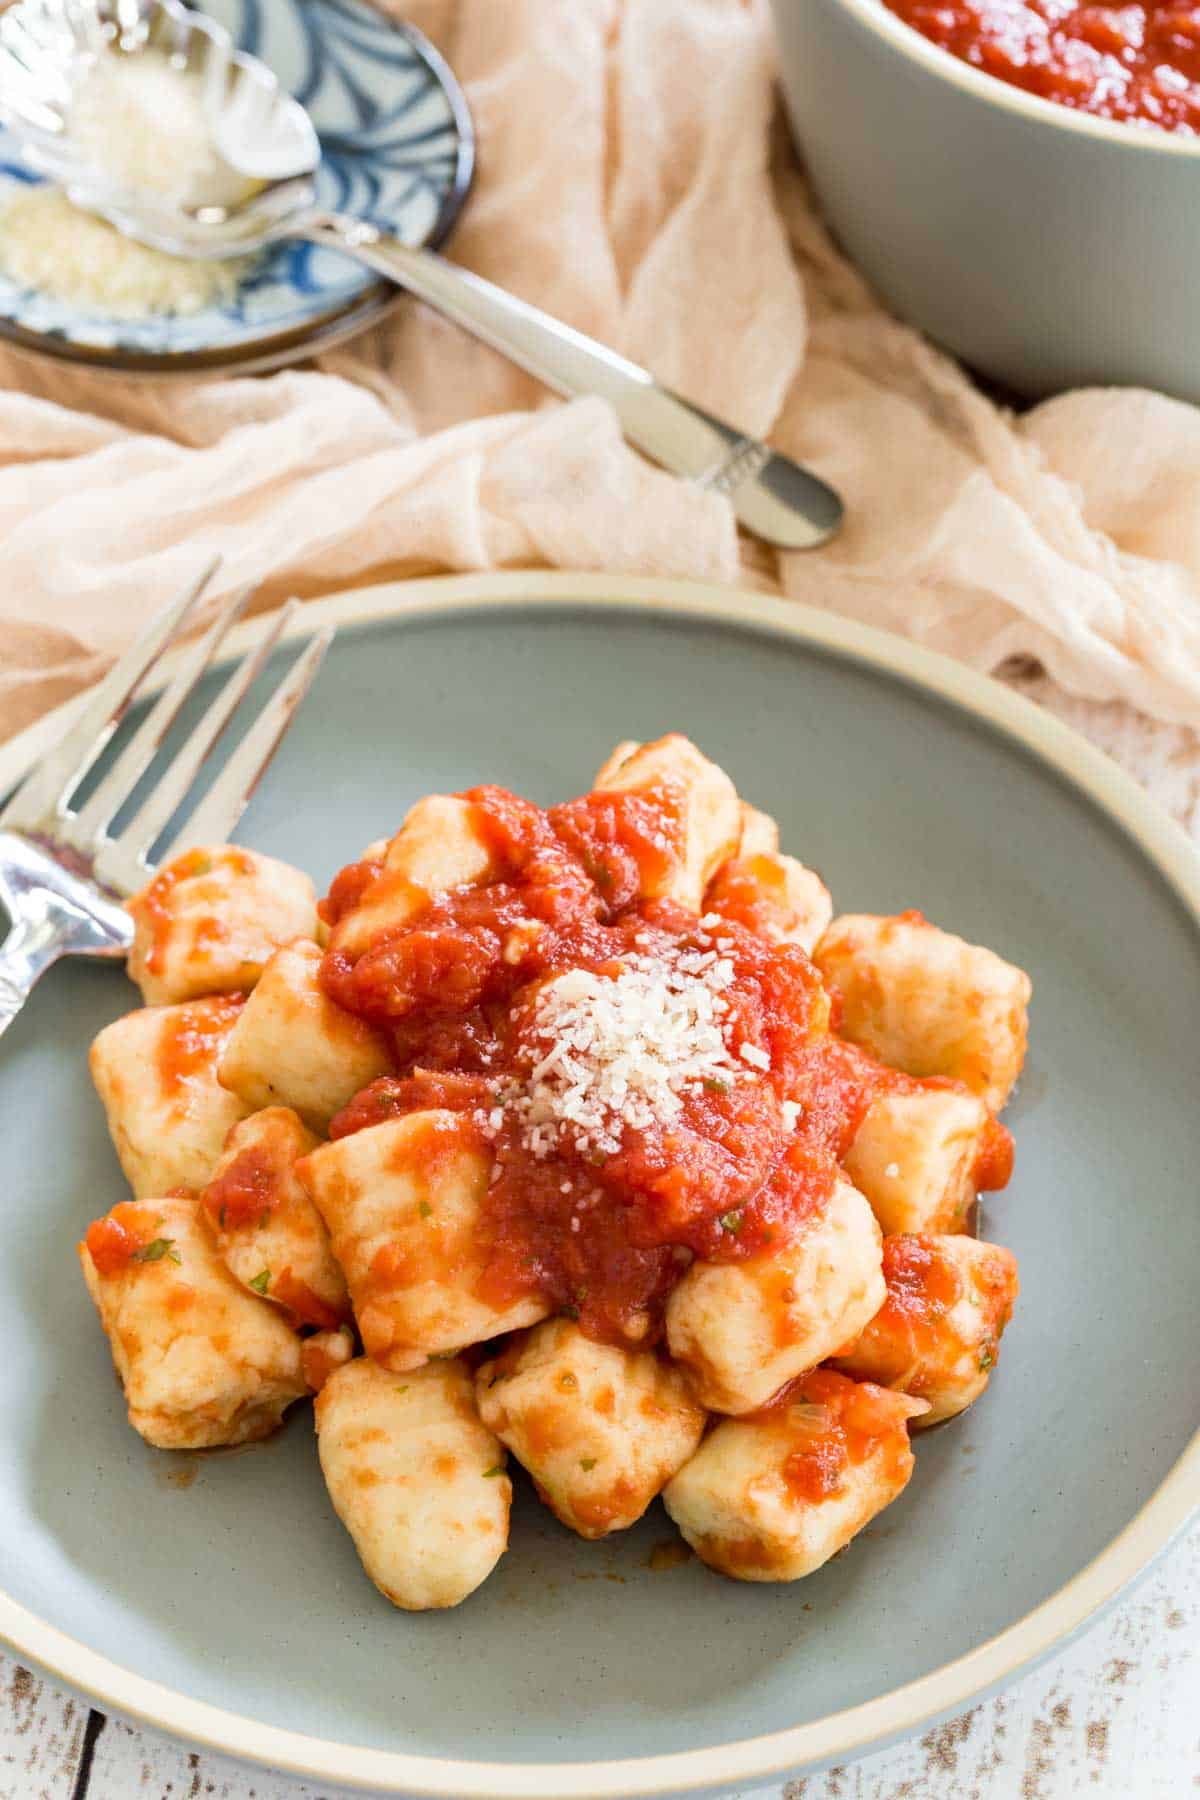 Gluten-free gnocchi served with tomato sauce and parmesan on a plate.